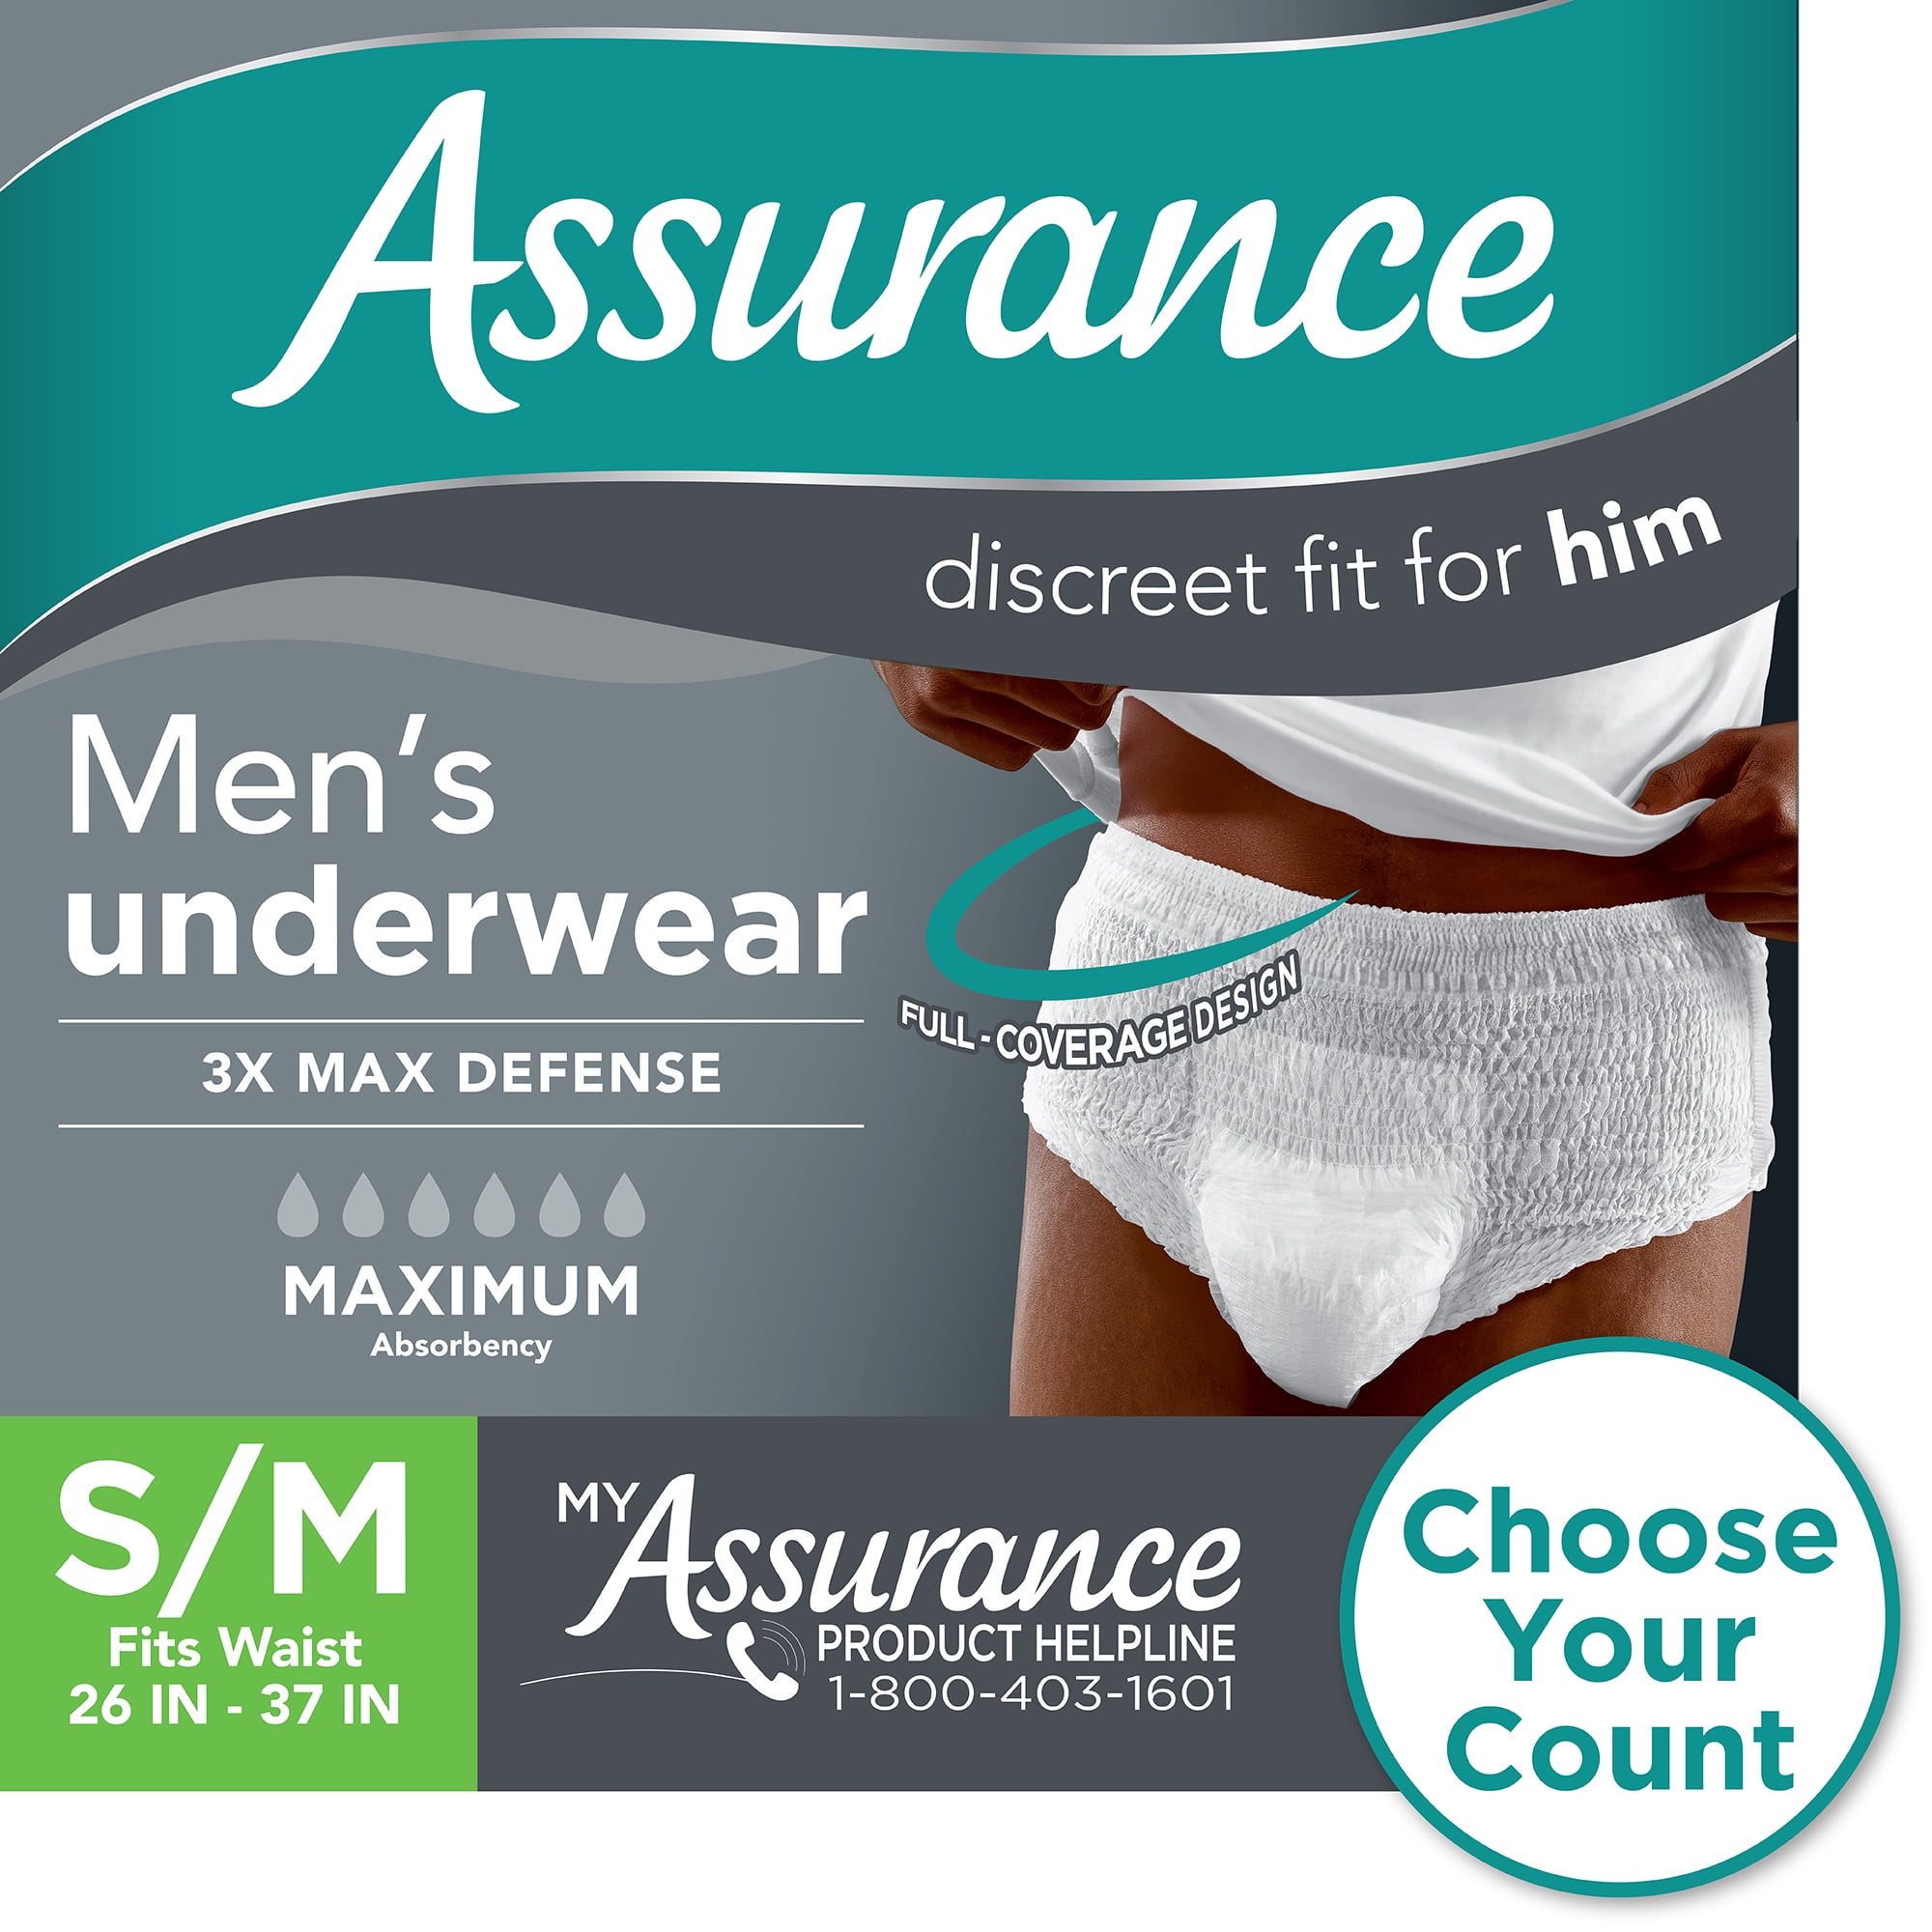 PACK OF 2 - Assurance Incontinence Underwear for Women, Maximum, S/M, 60 Ct